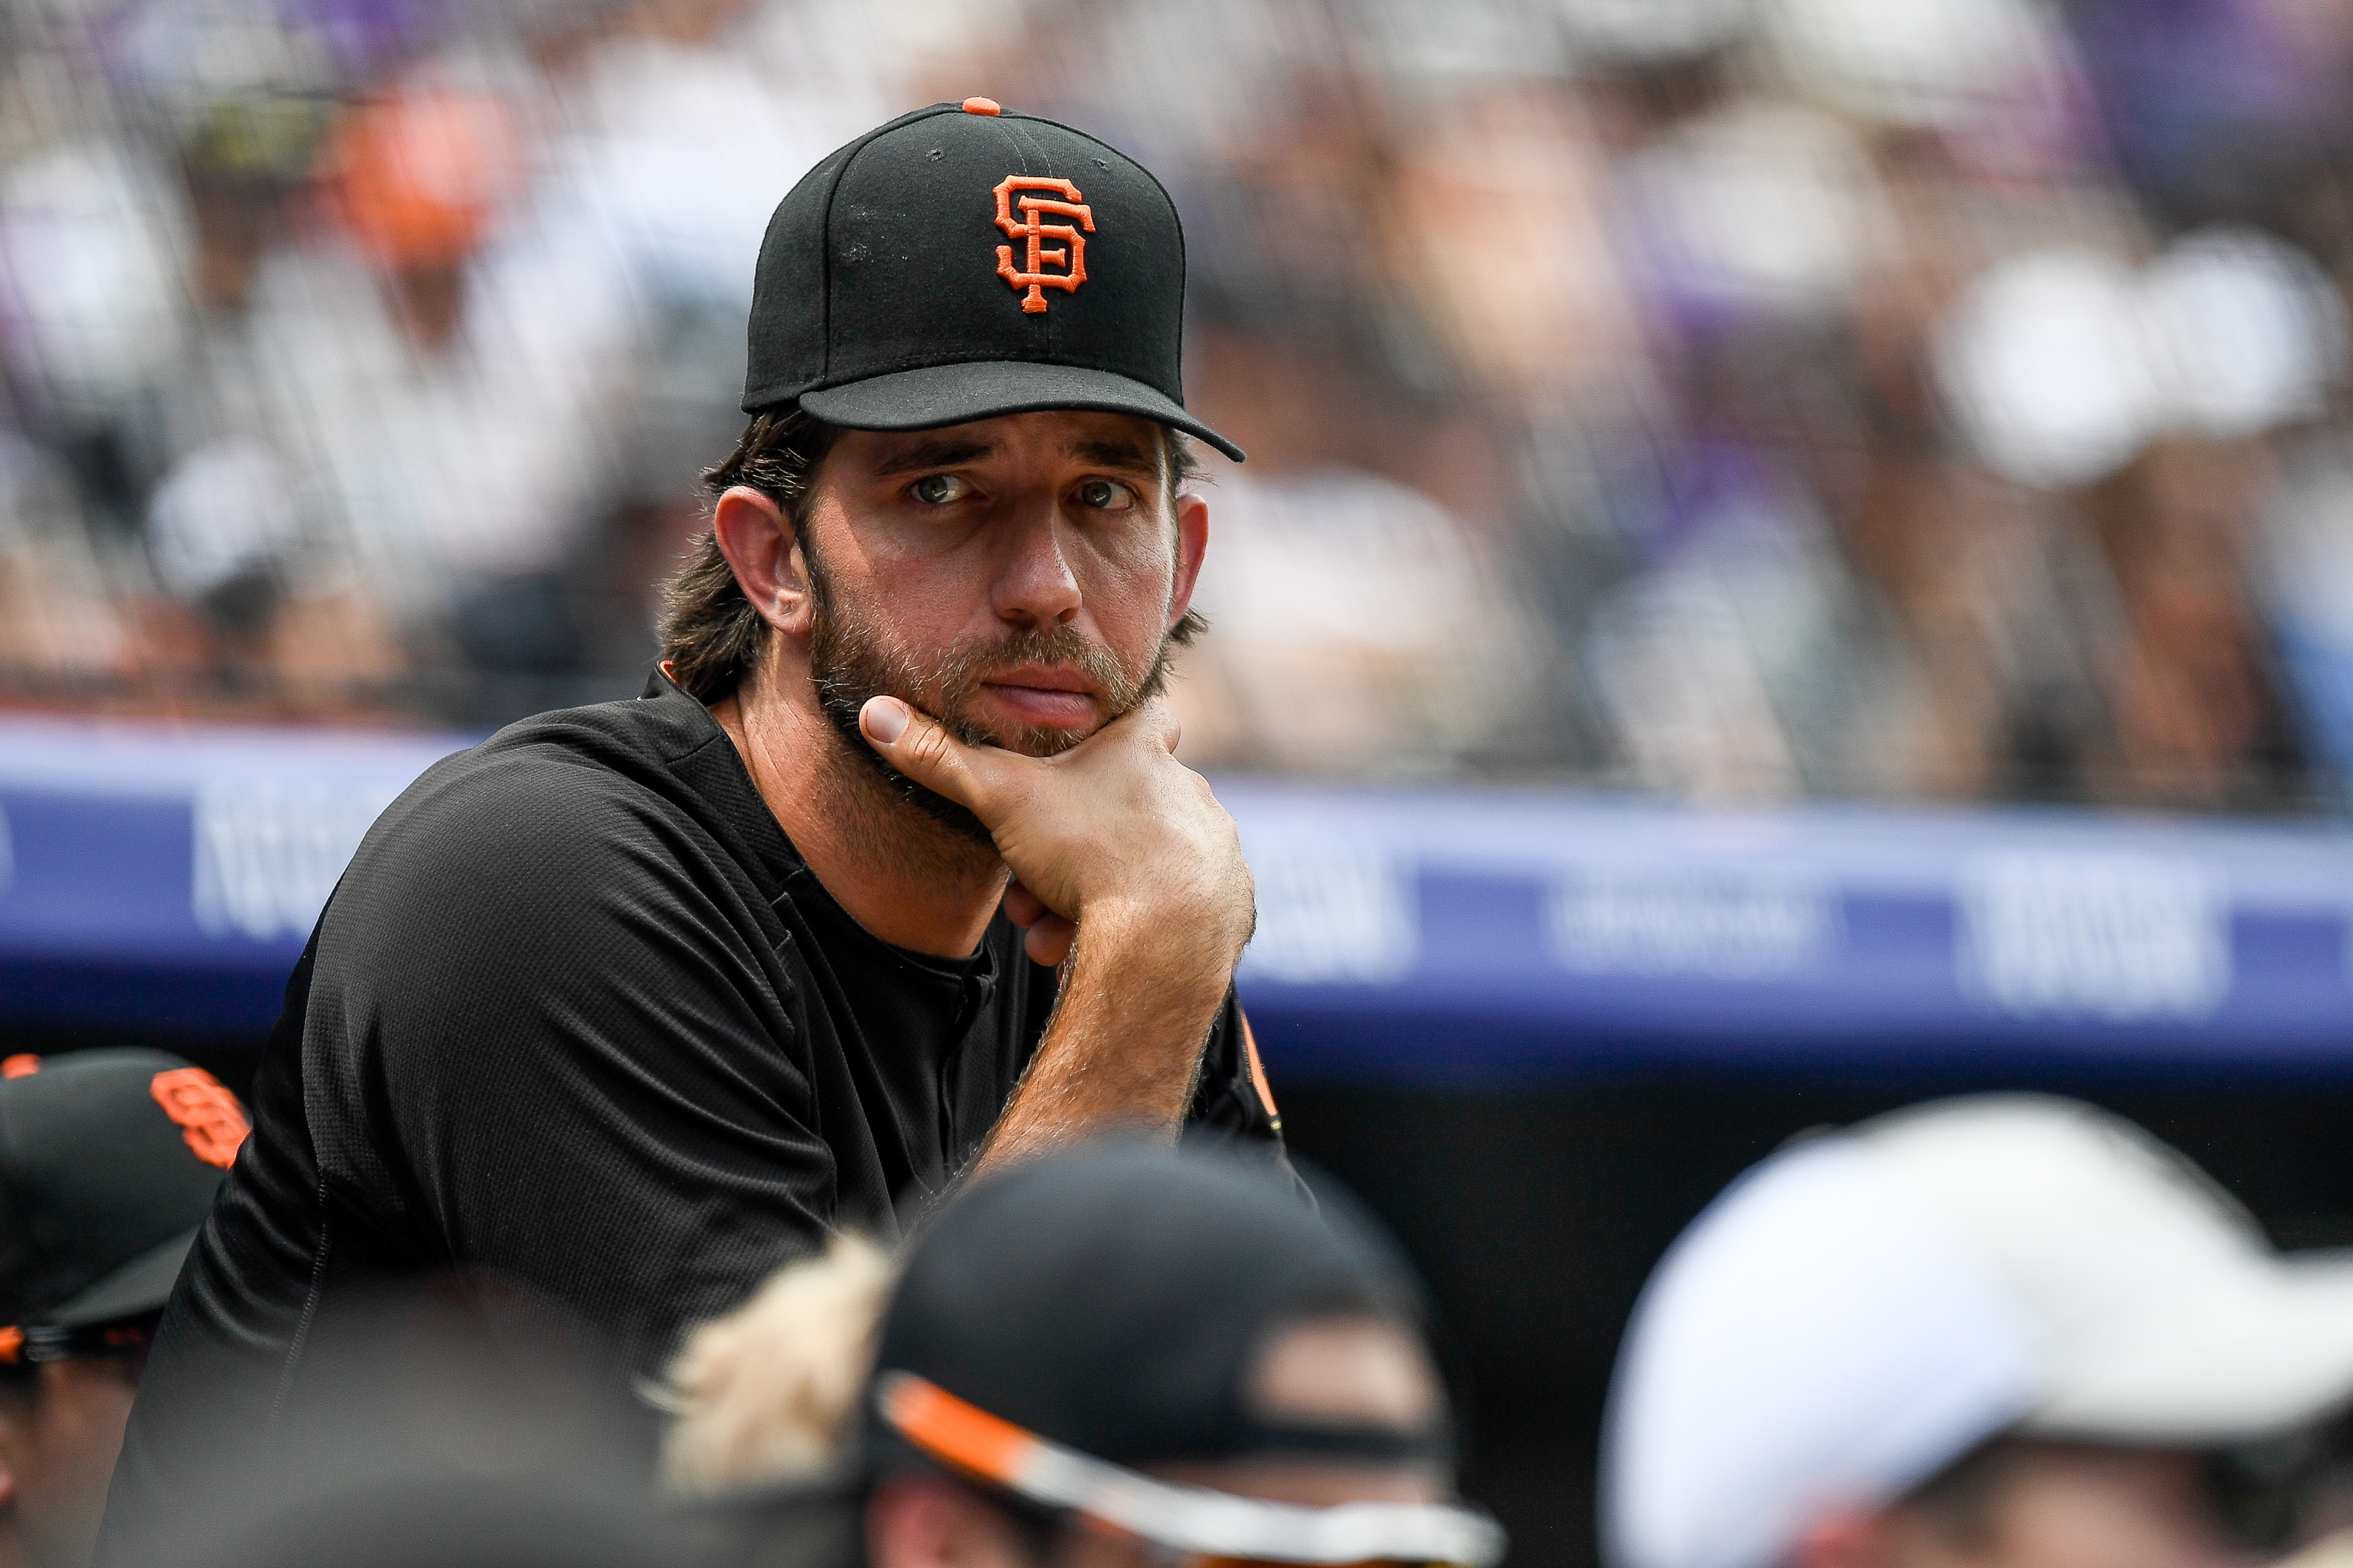 MLB Free Agent Tracker: Why MadBum could be a steal